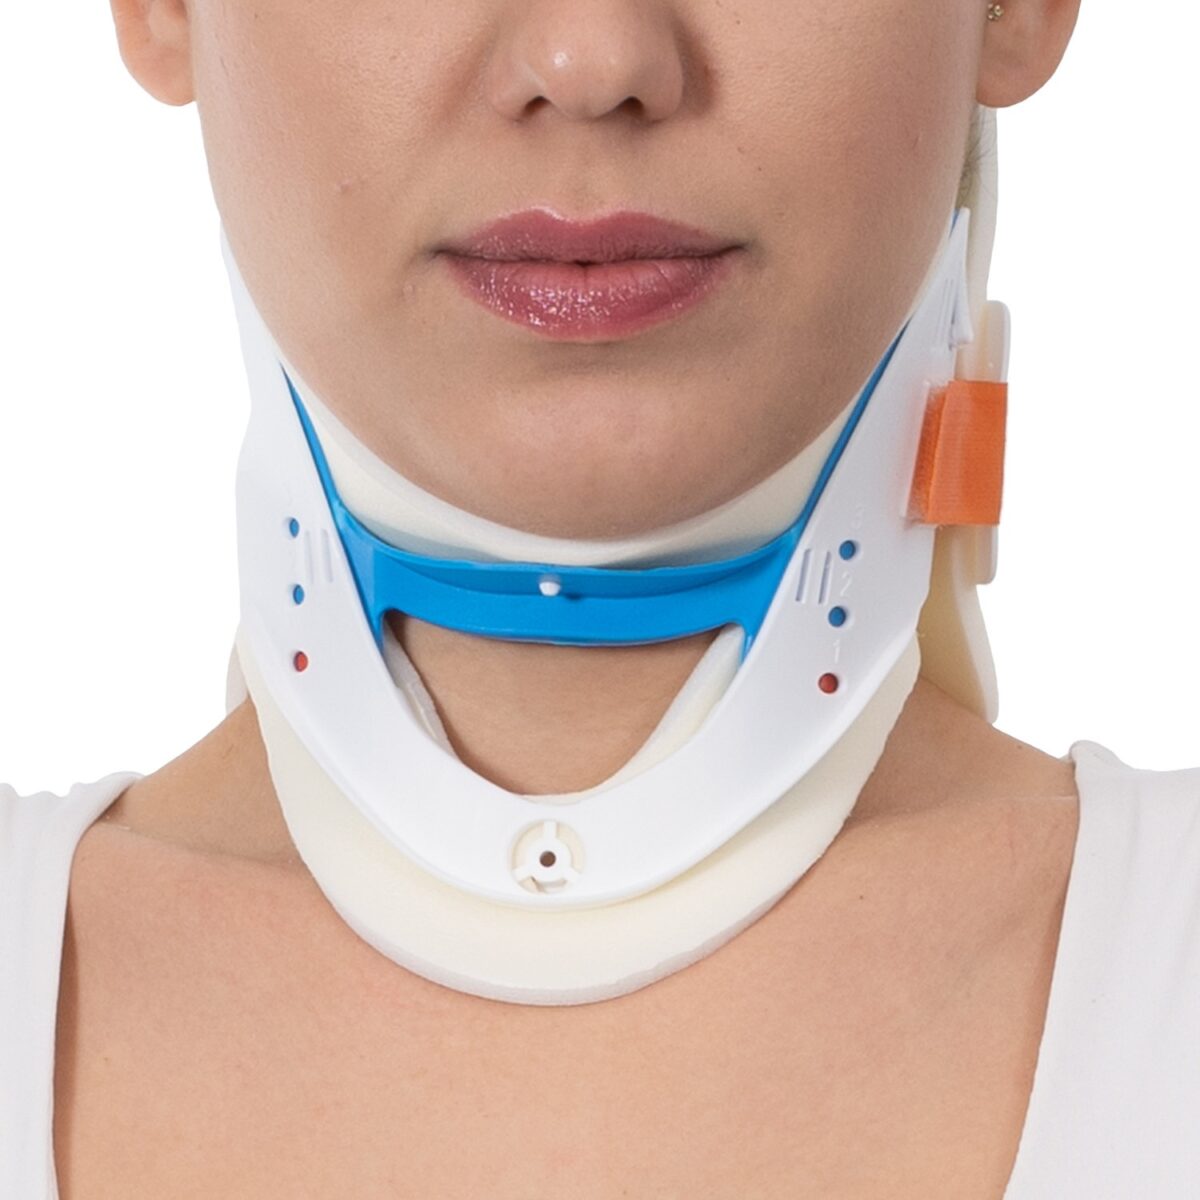 wingmed orthopedic equipments W110 adjustable first aid collar product 3 1